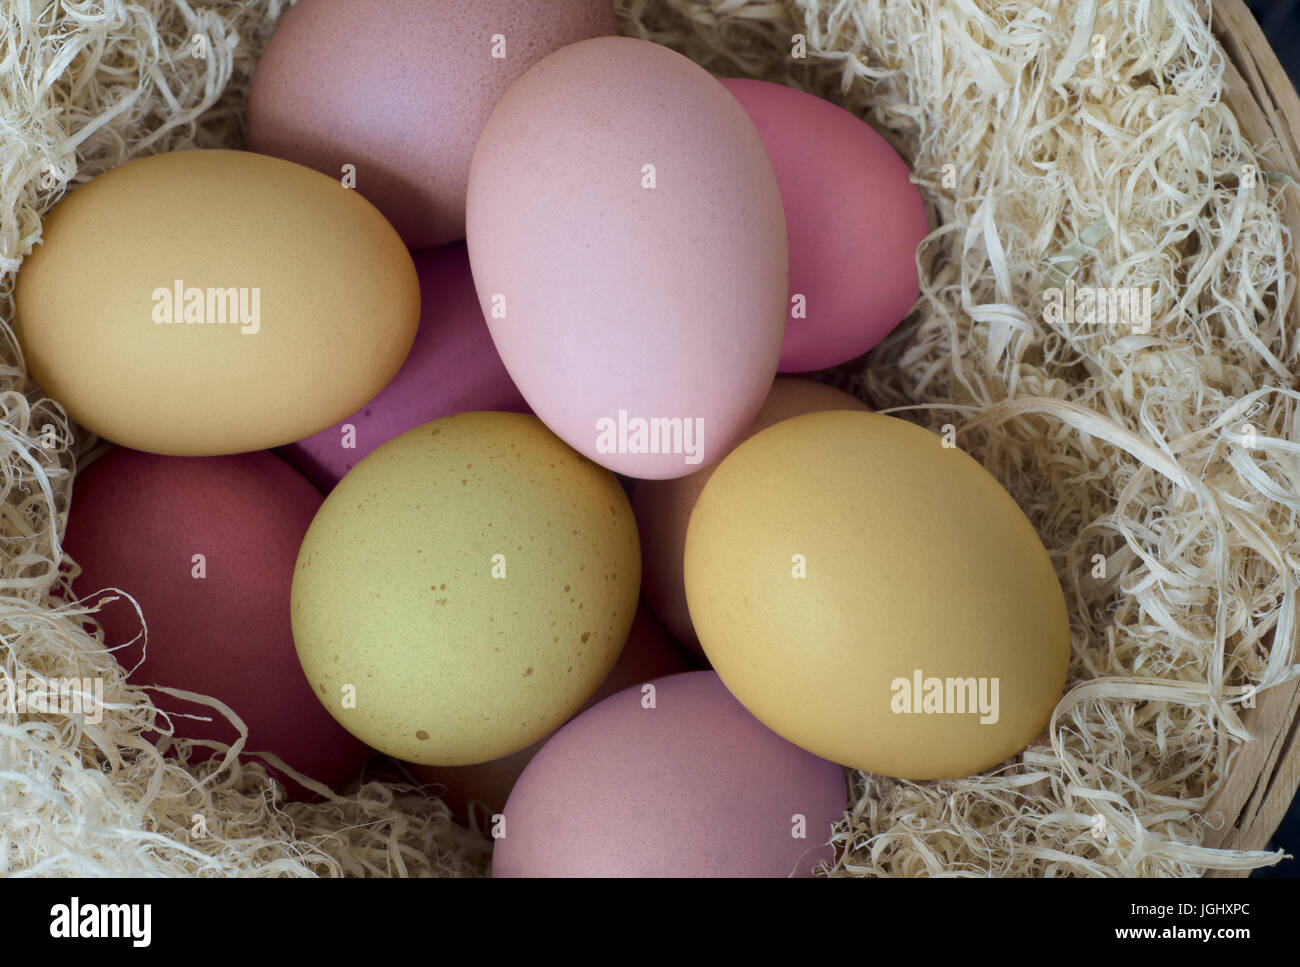 Colourful, painted natural eggs for Easter in pink, green and yellow hues.  Nesting in a basket of tangled dried grasses and photographed from above. Stock Photo